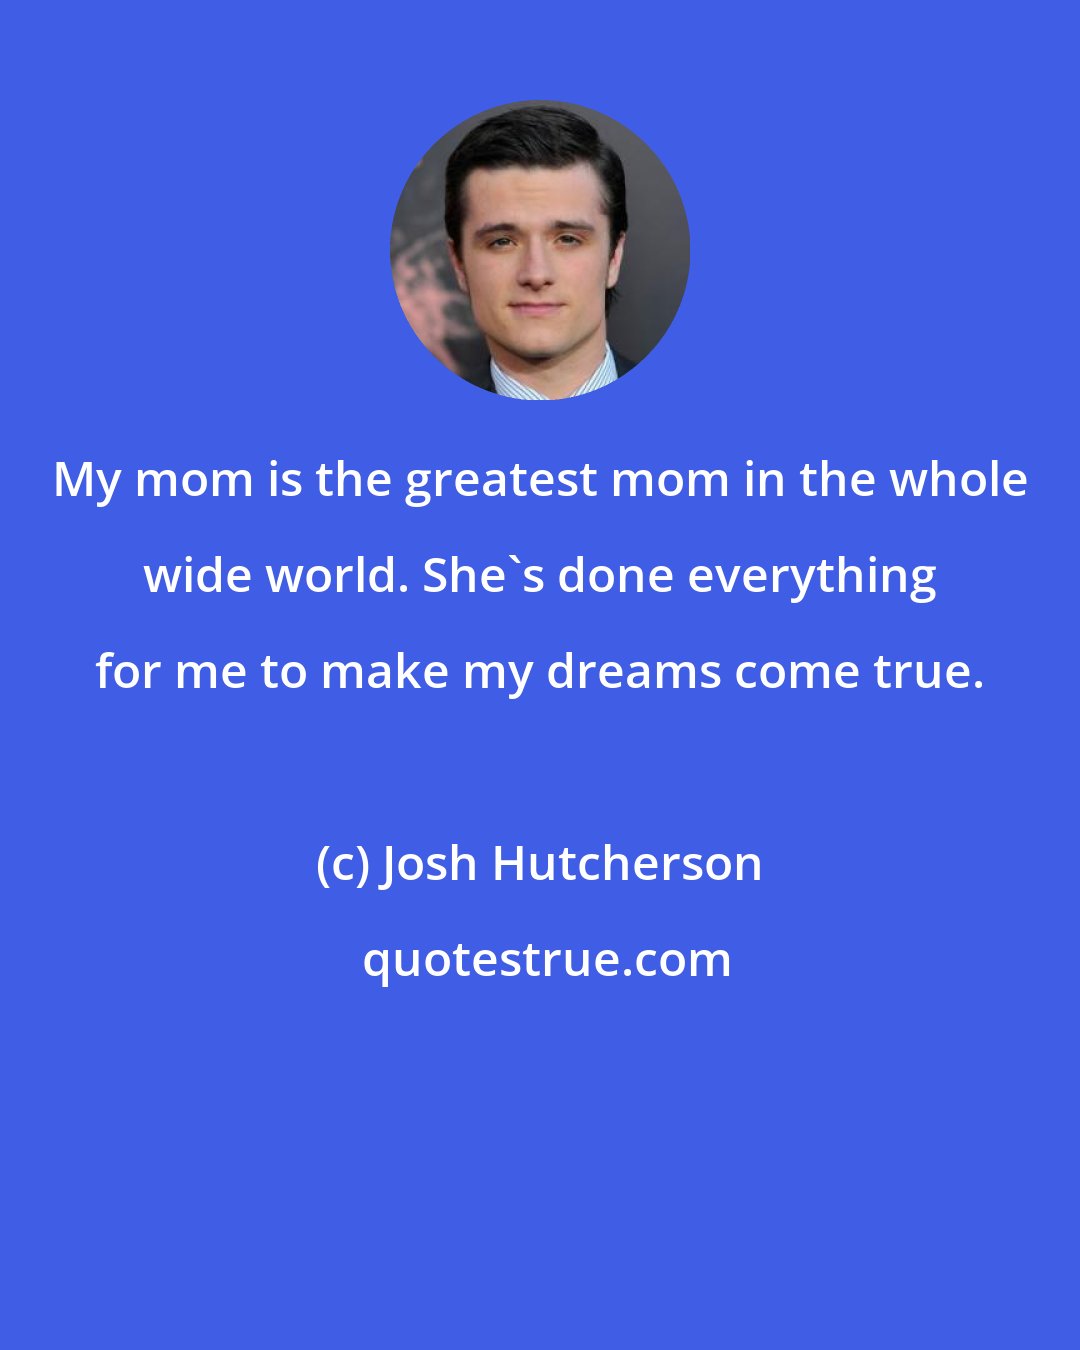 Josh Hutcherson: My mom is the greatest mom in the whole wide world. She's done everything for me to make my dreams come true.